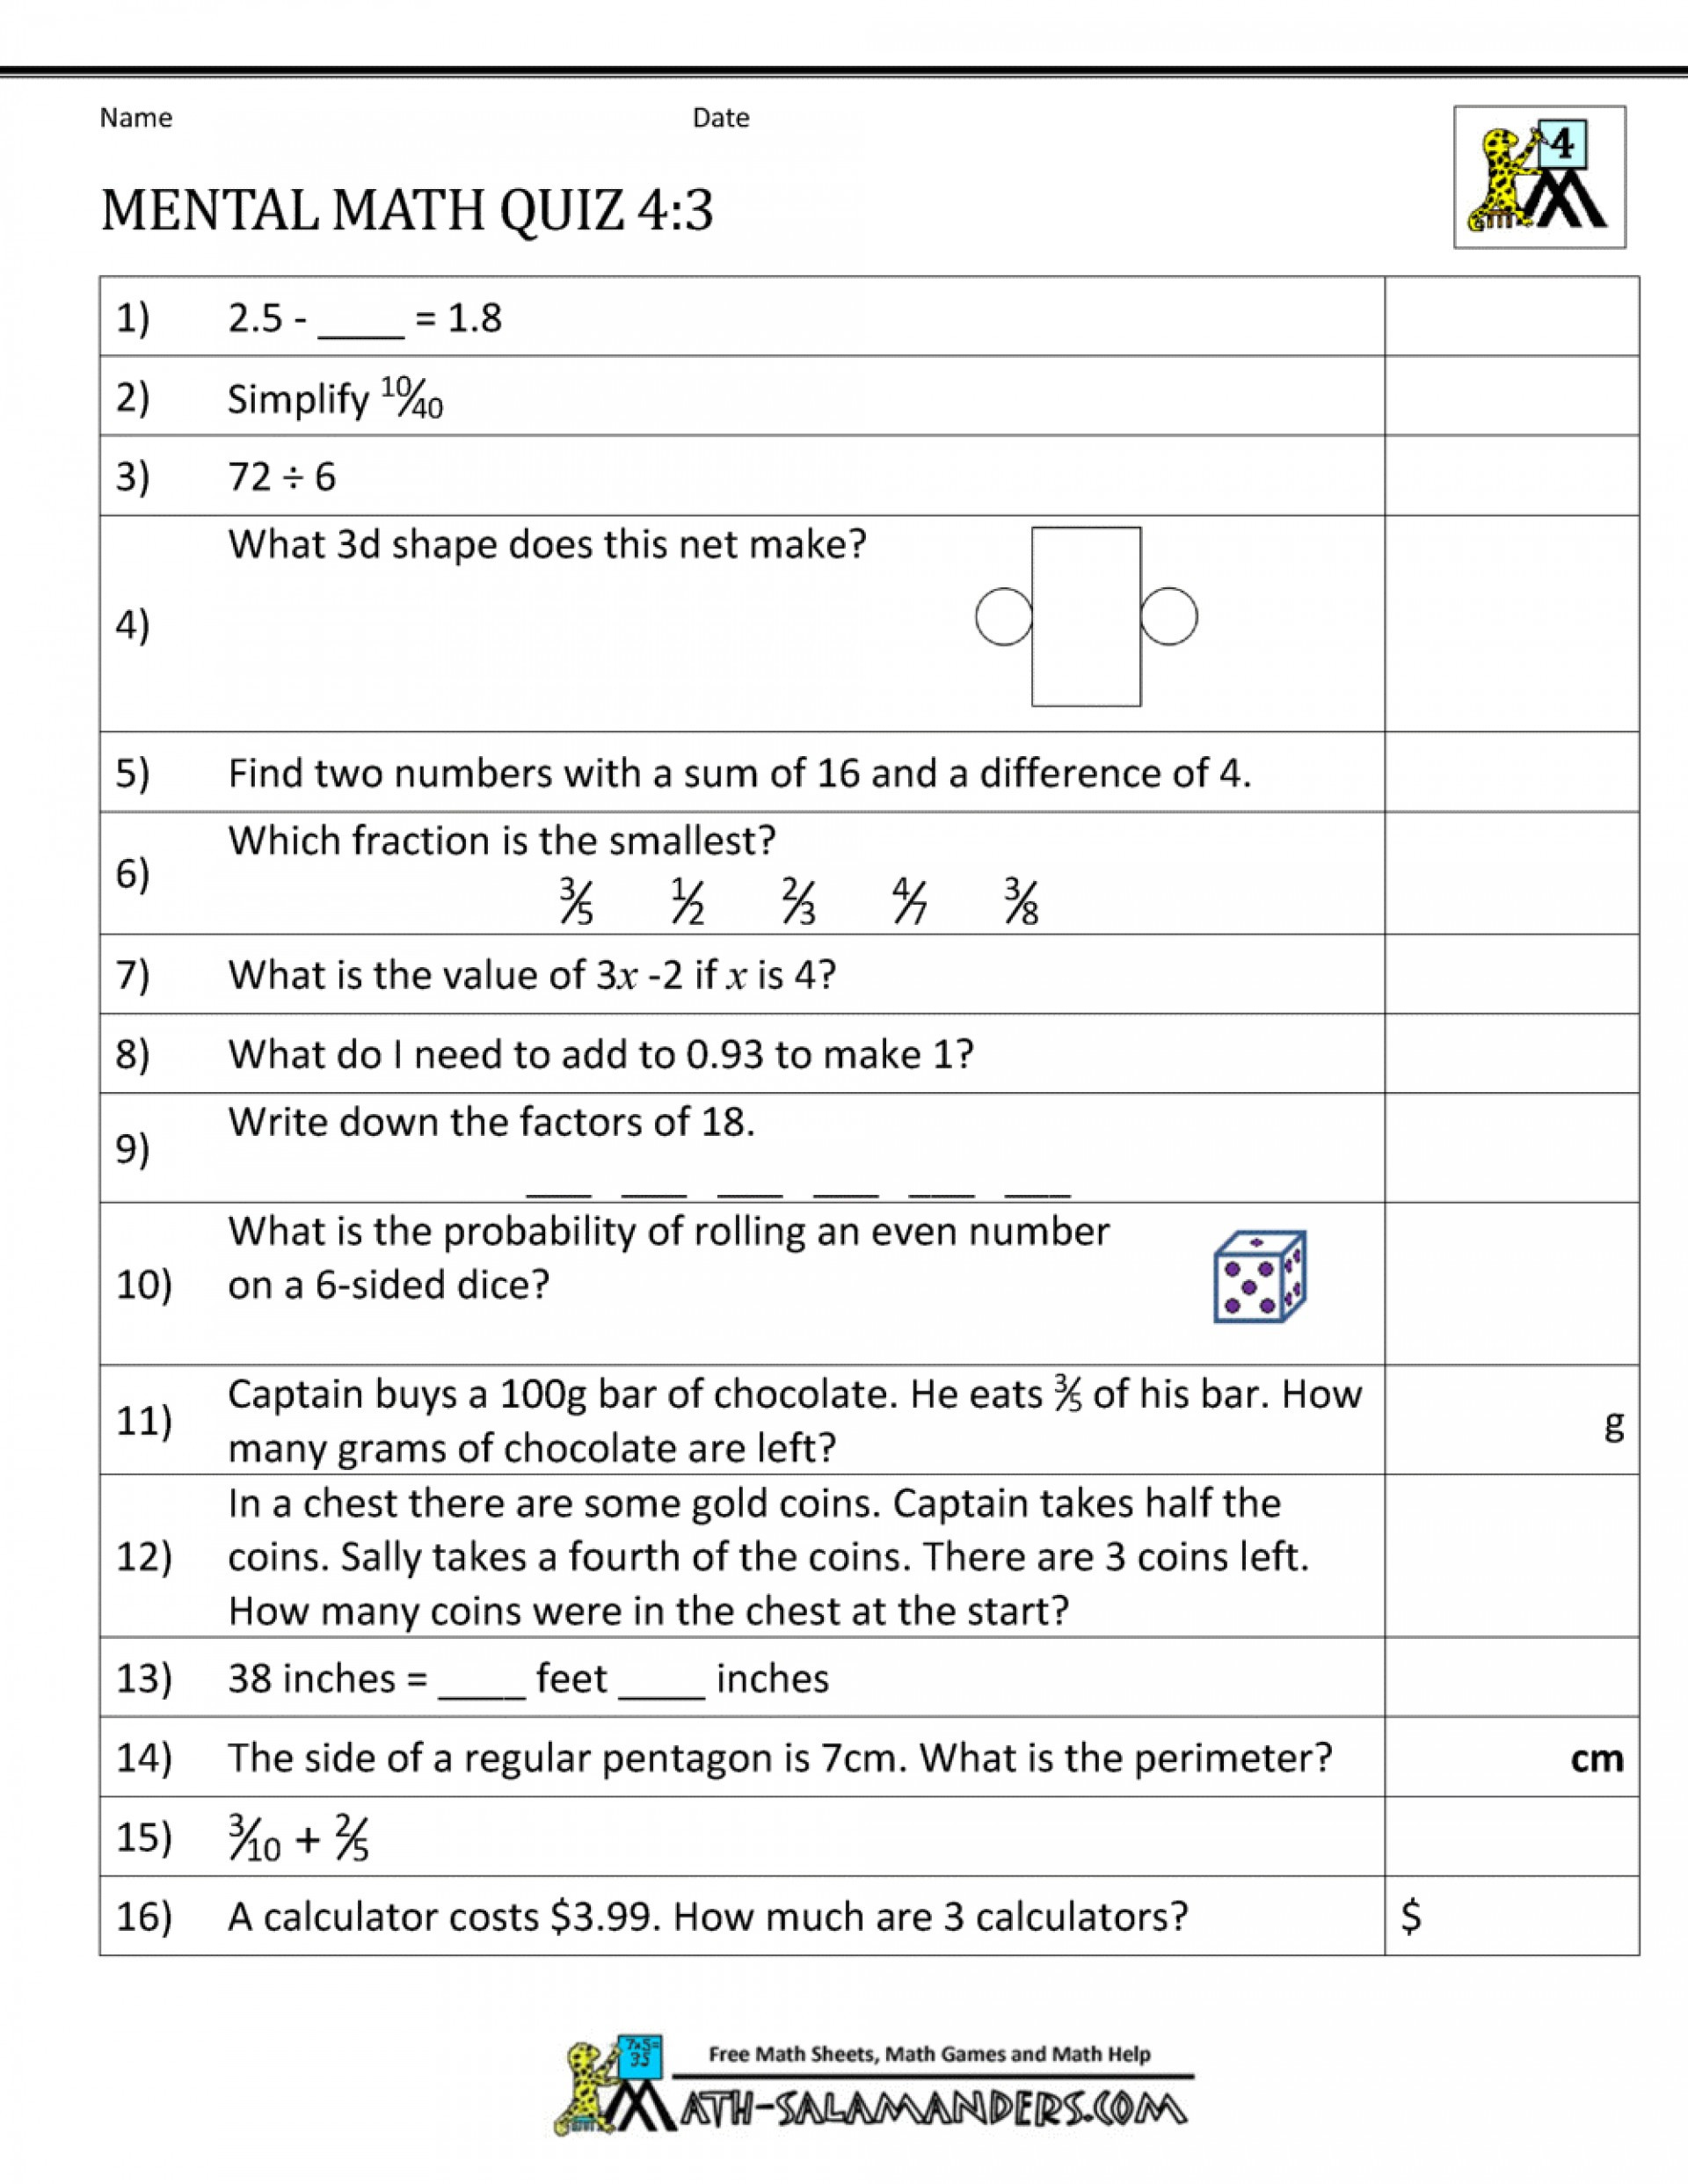 Free Math Worksheets Third Grade 3 Fractions and Decimals Equivalent 3 Fractions